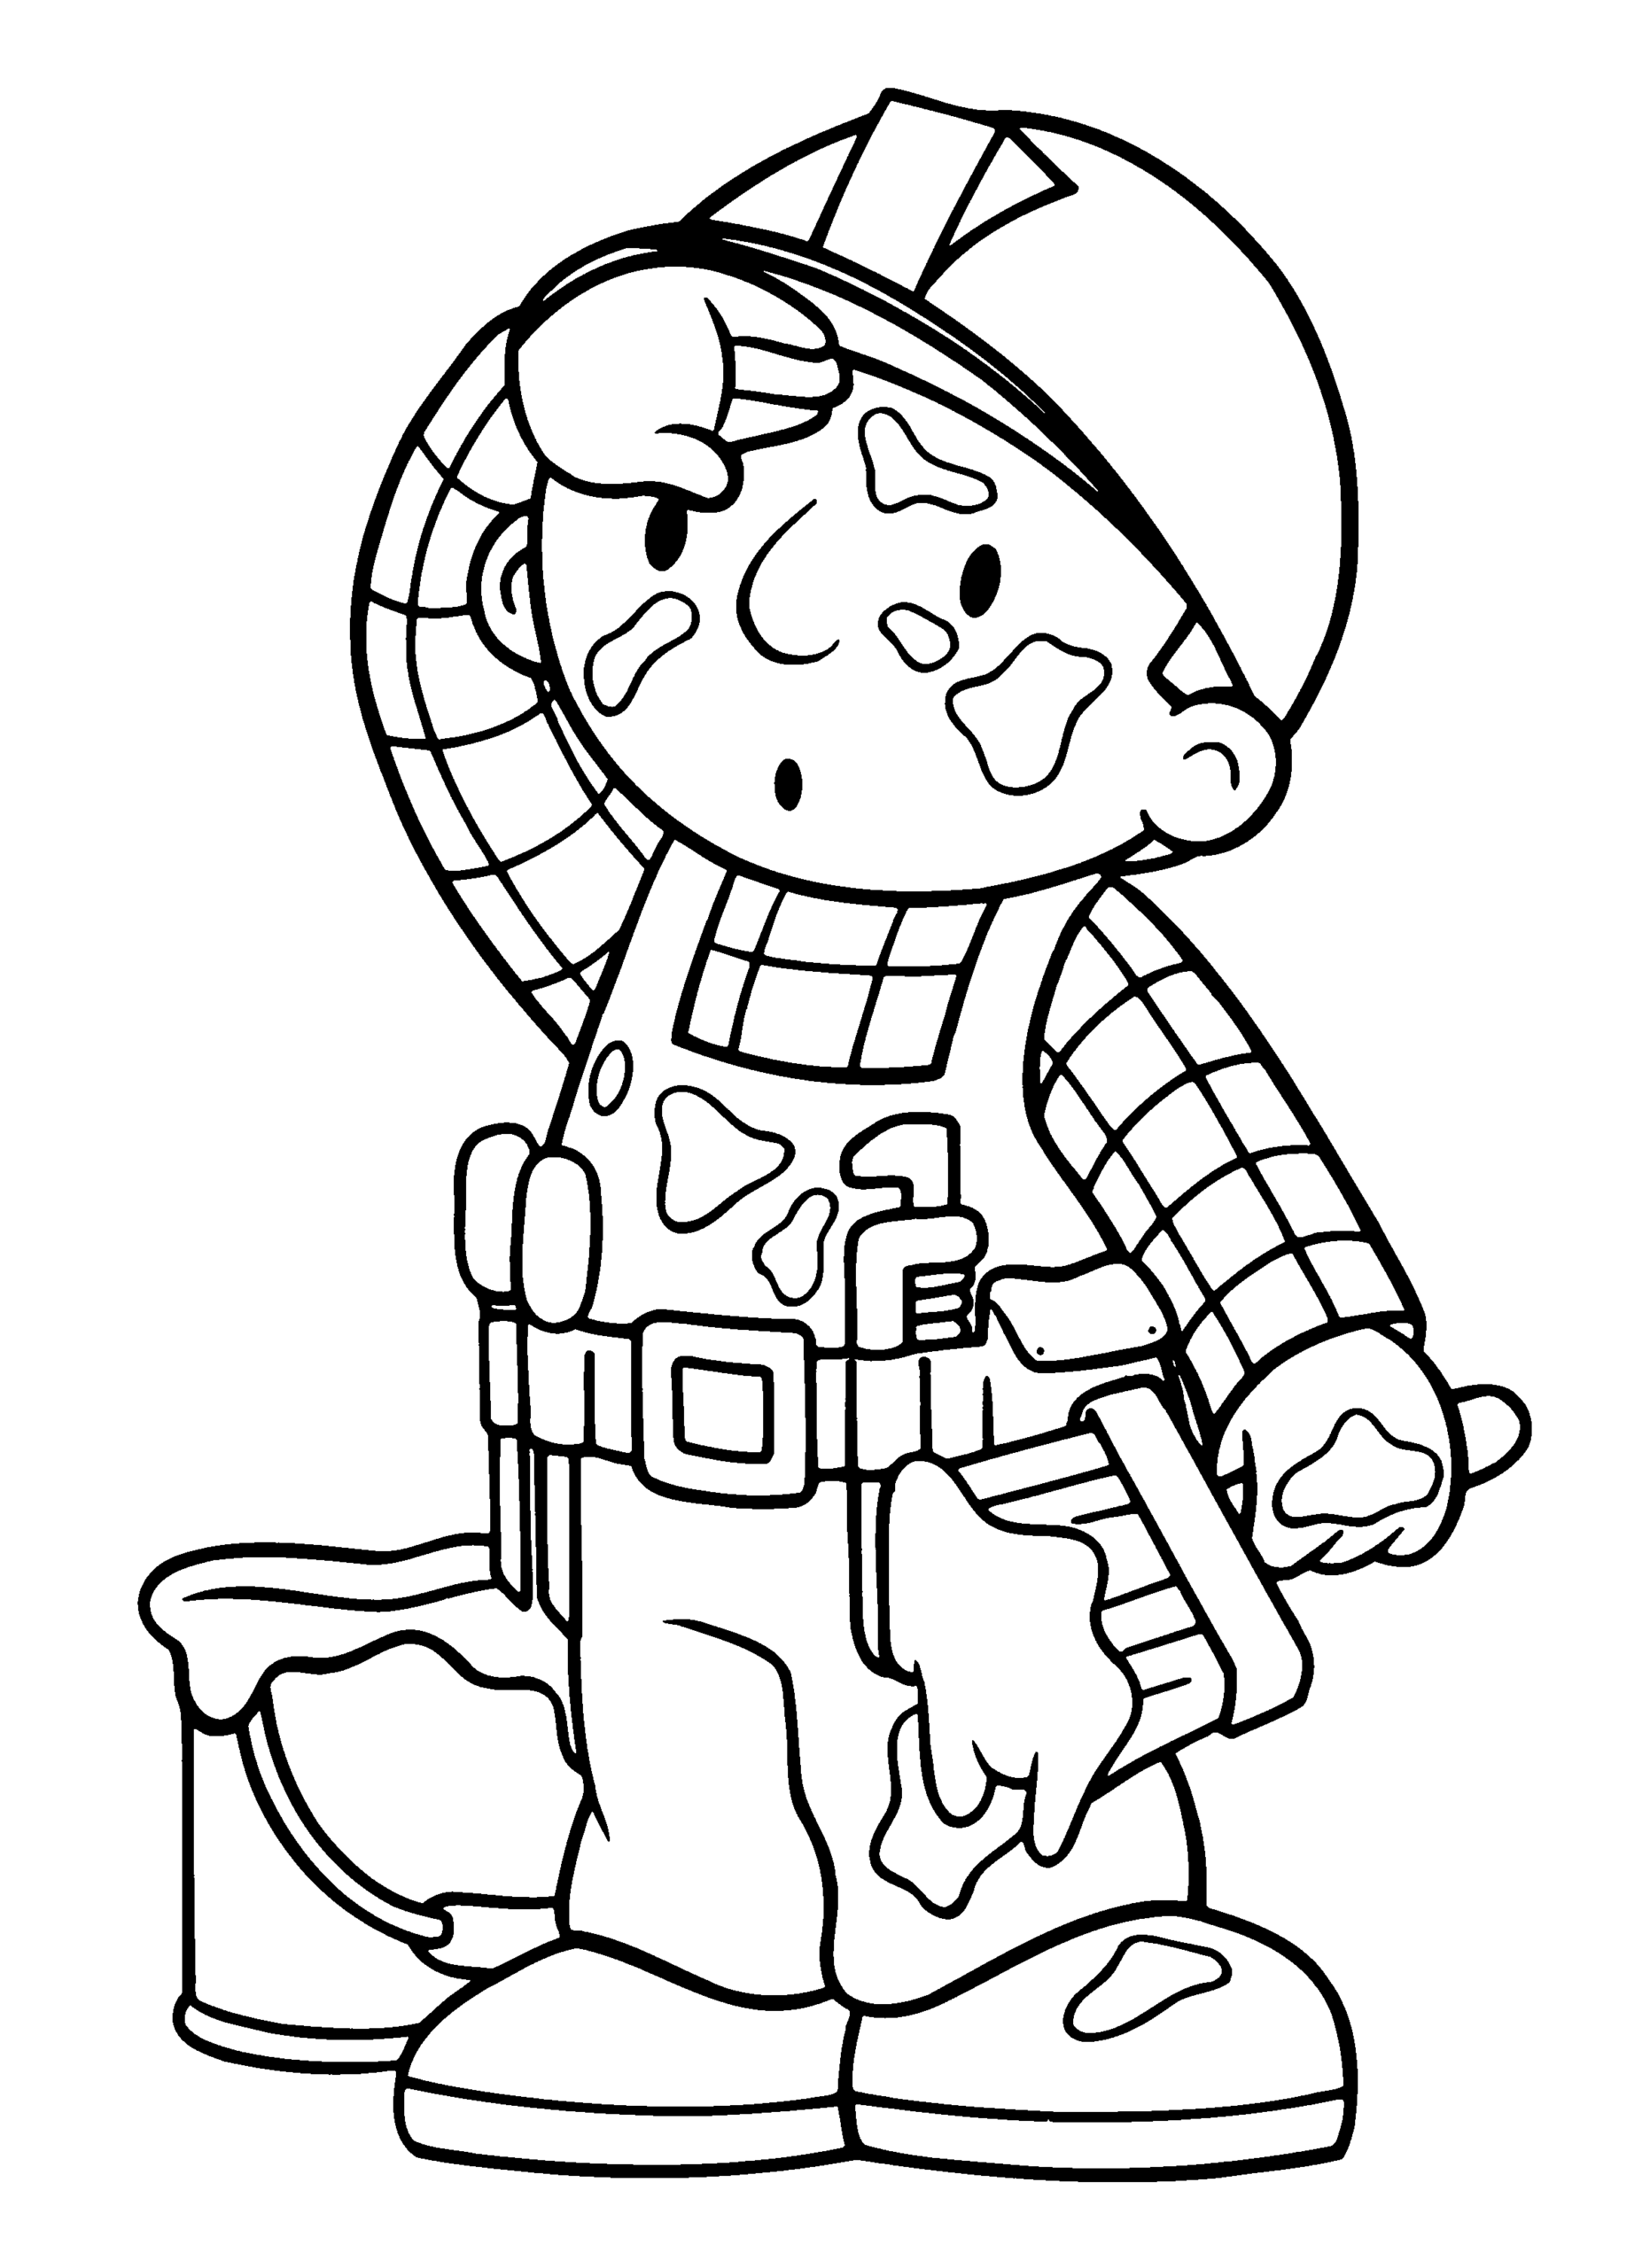 Bob the Builder Coloring Pages TV Film bob the builder 47 Printable 2020 01066 Coloring4free